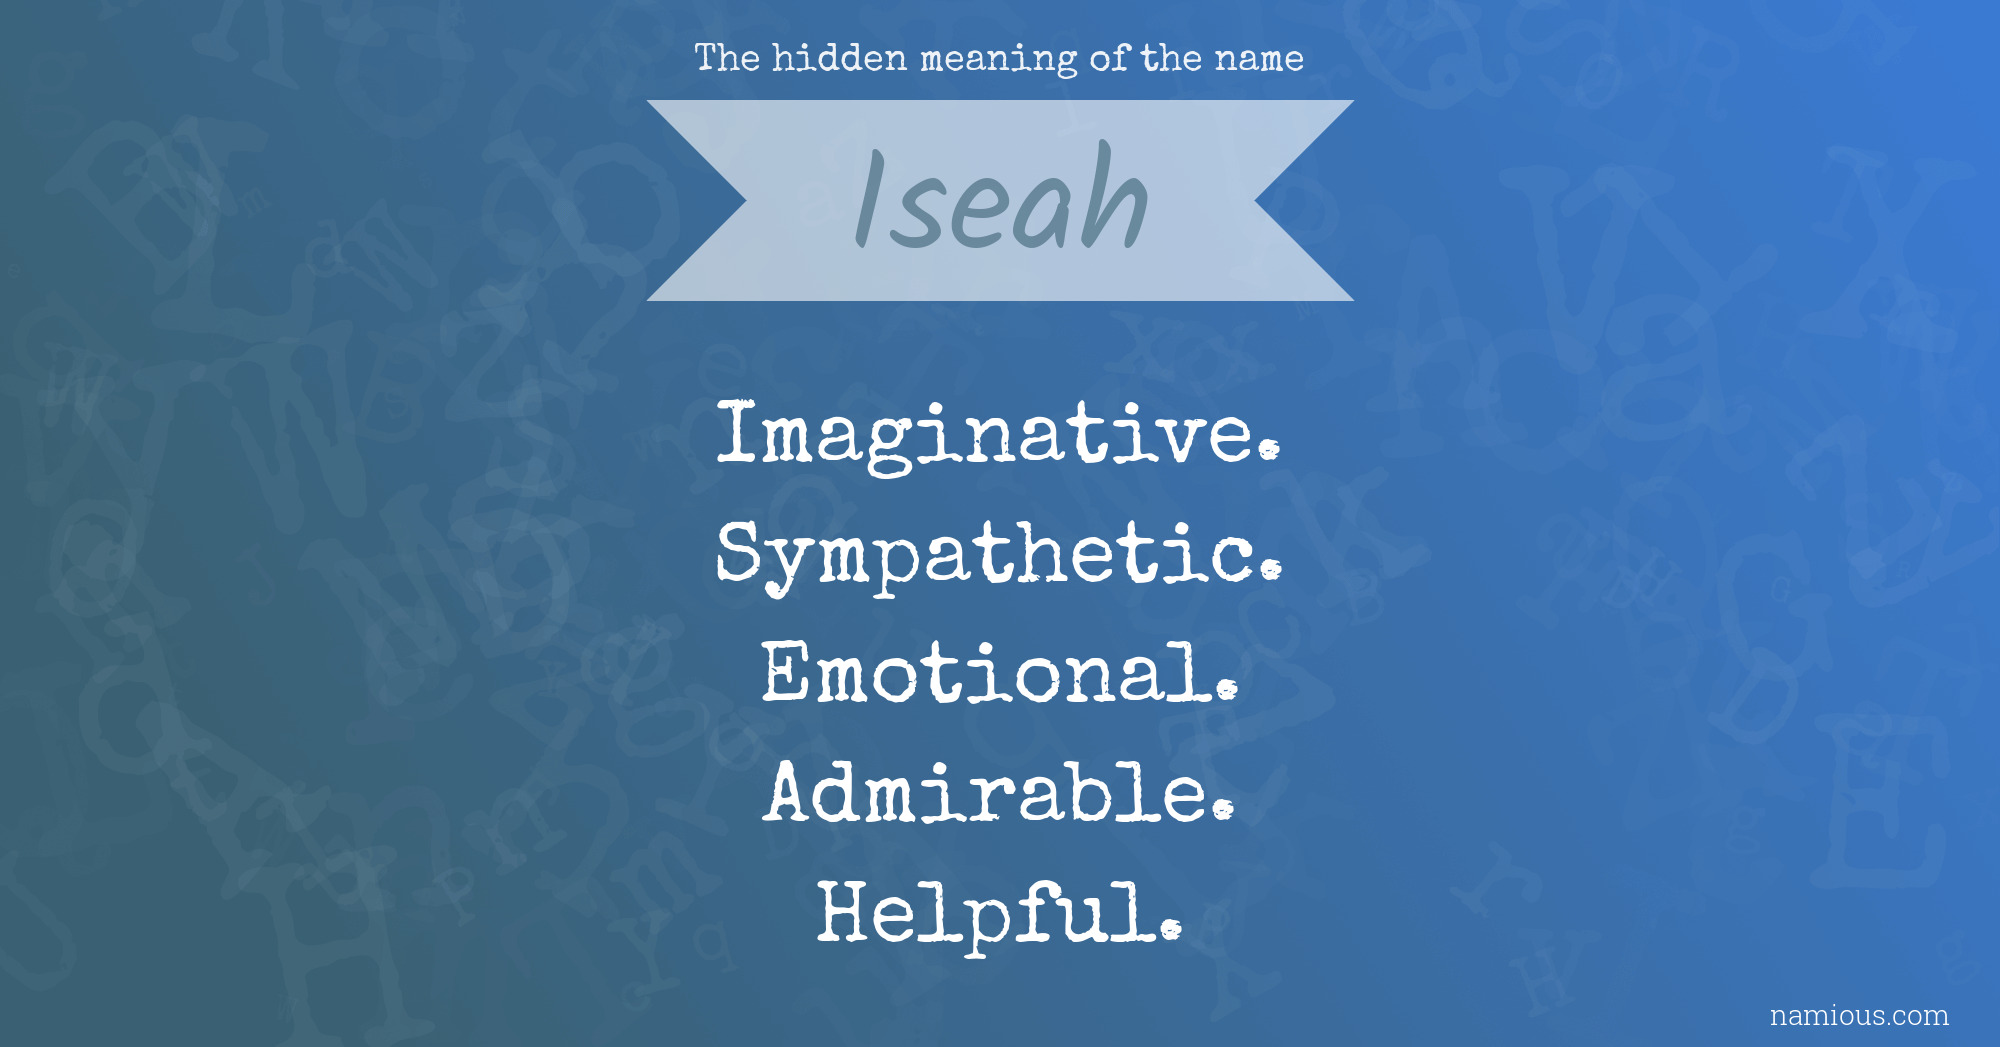 The hidden meaning of the name Iseah